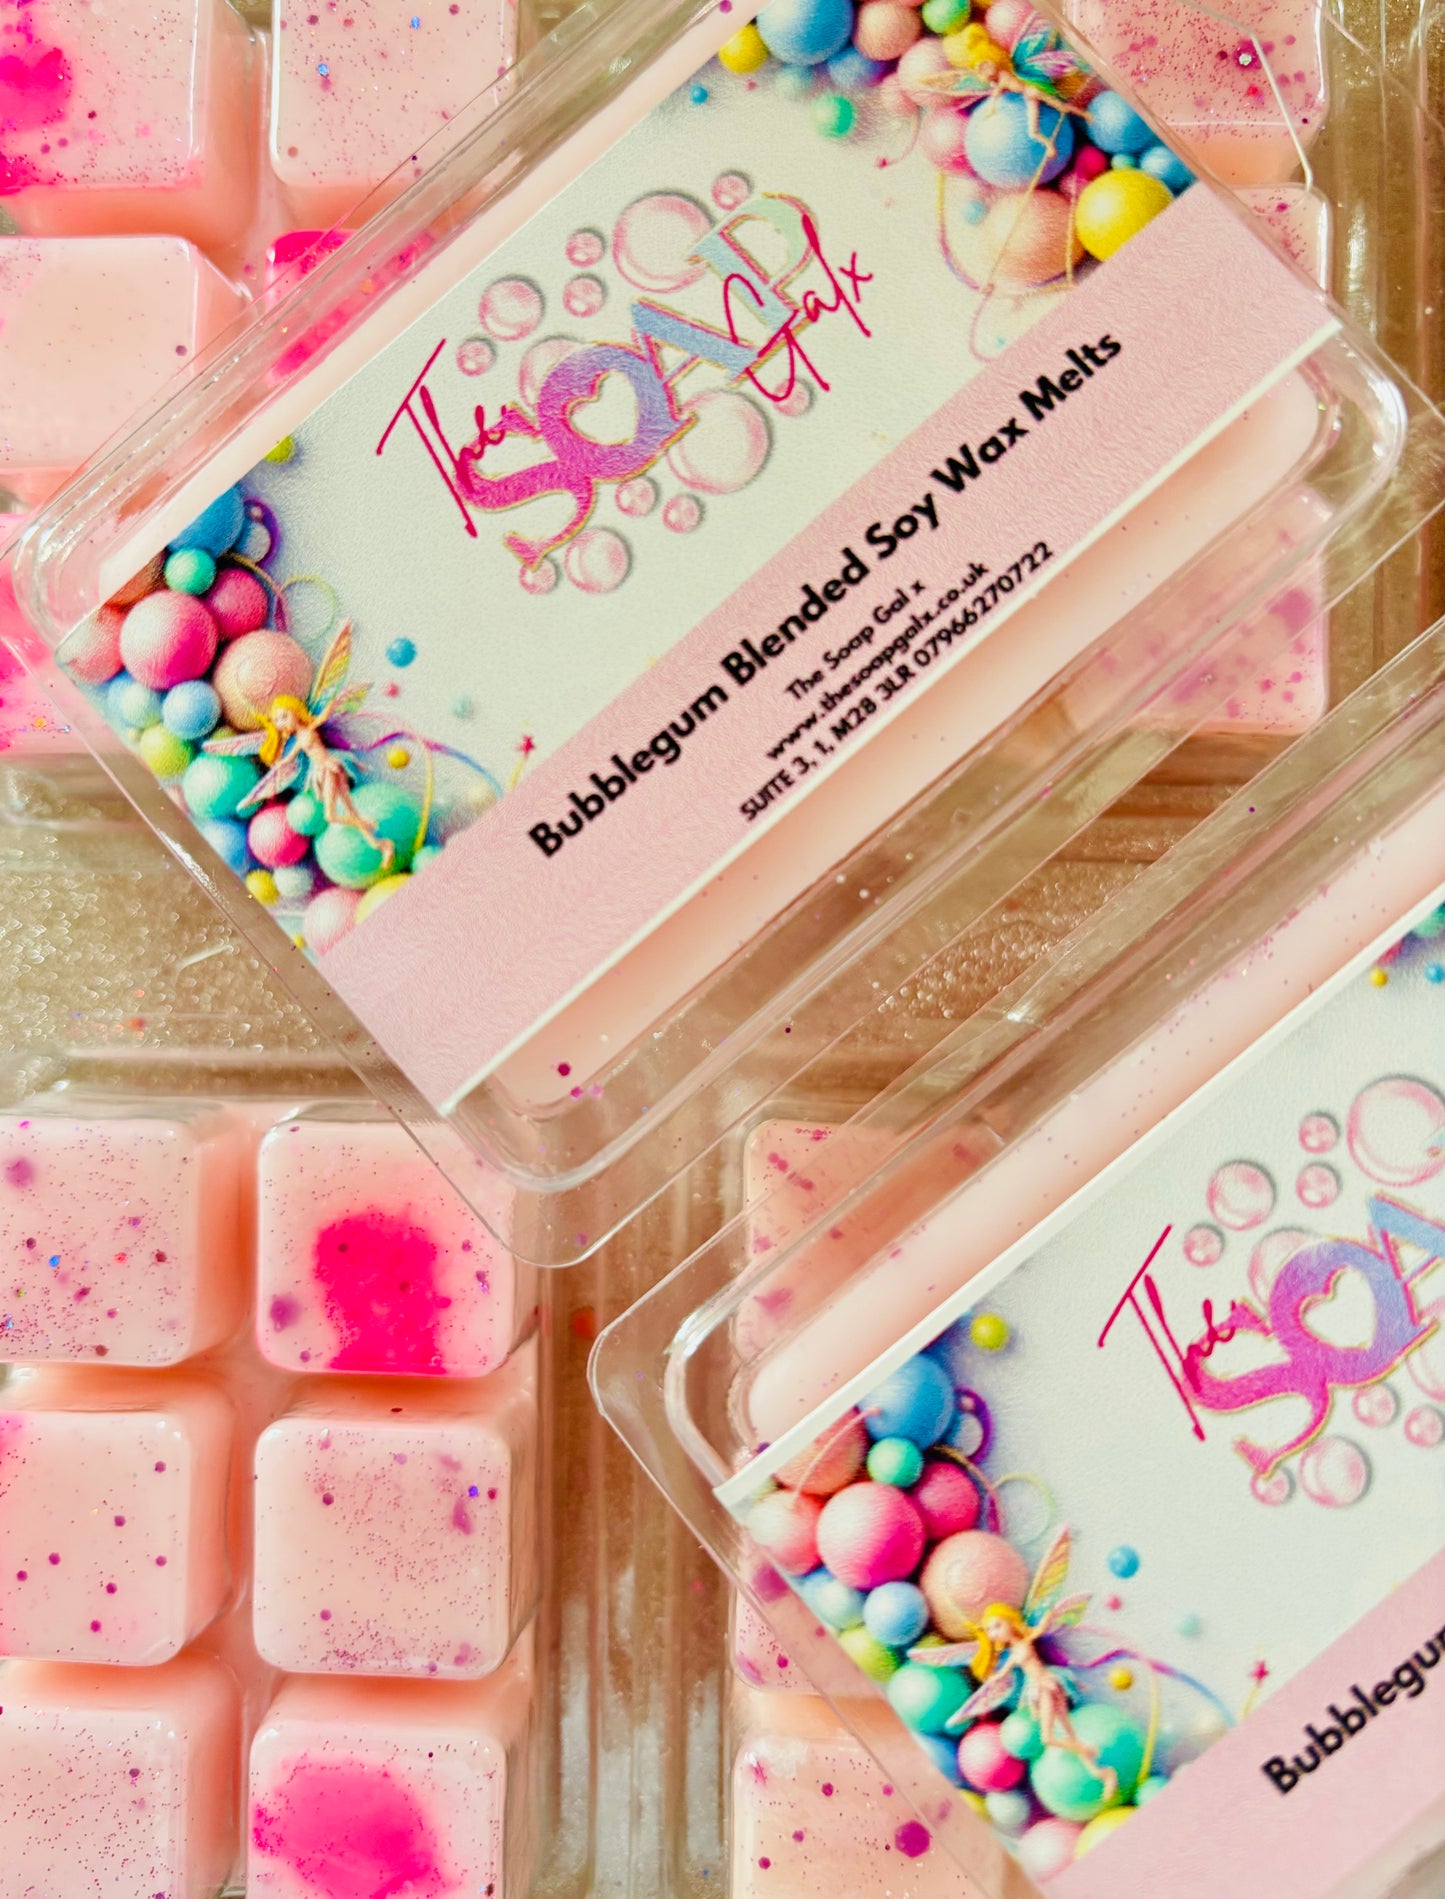 Luxury Bubba Hubba Bubblegum-scented eco soy wax melts in The Soap Gals packaging.